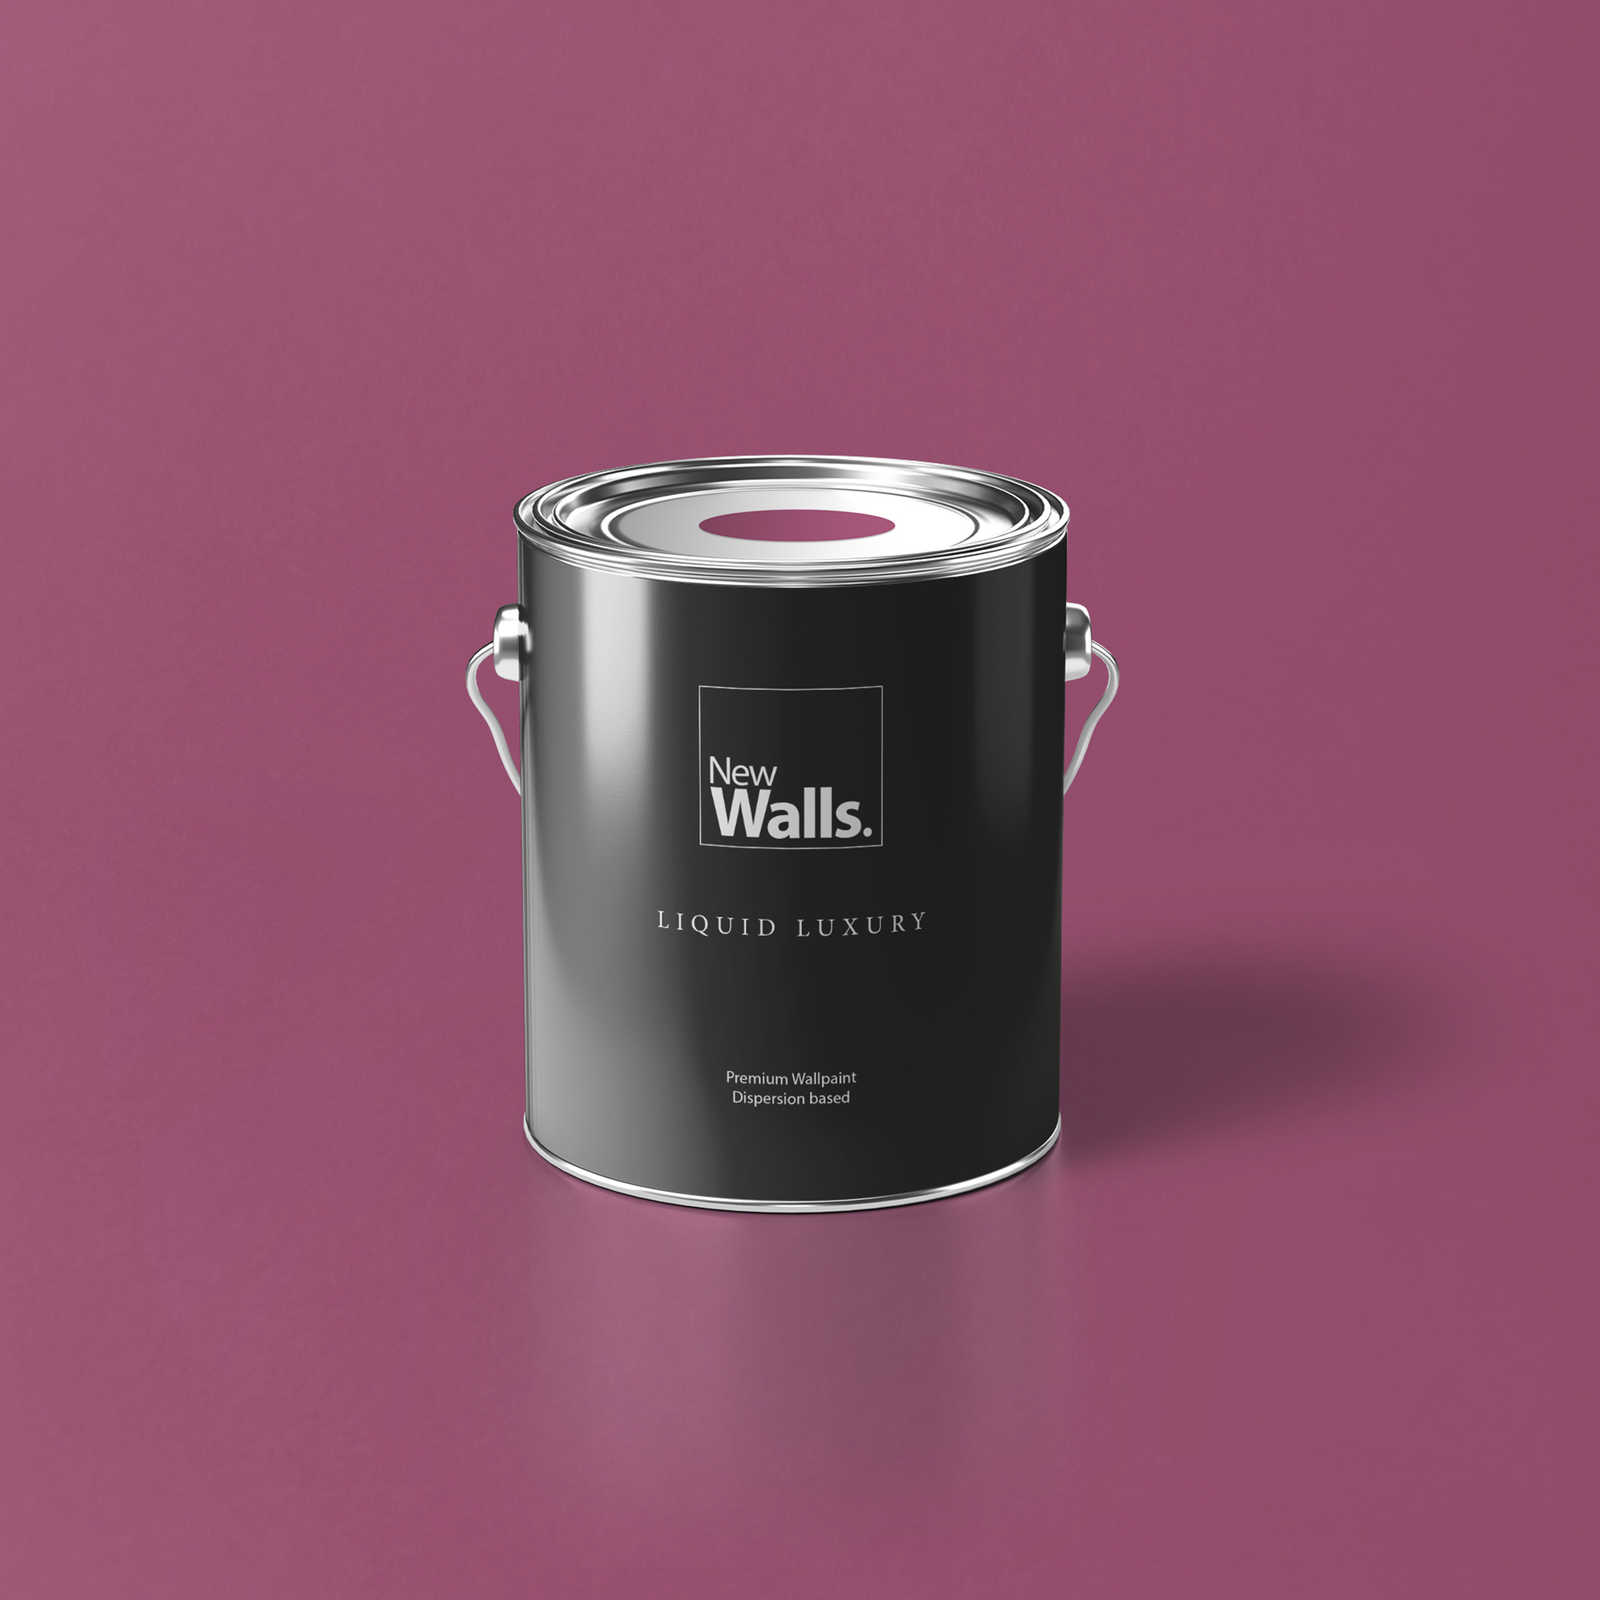 Premium Wall Paint stimulating berry »Beautiful Berry« NW208 – 2.5 litre
